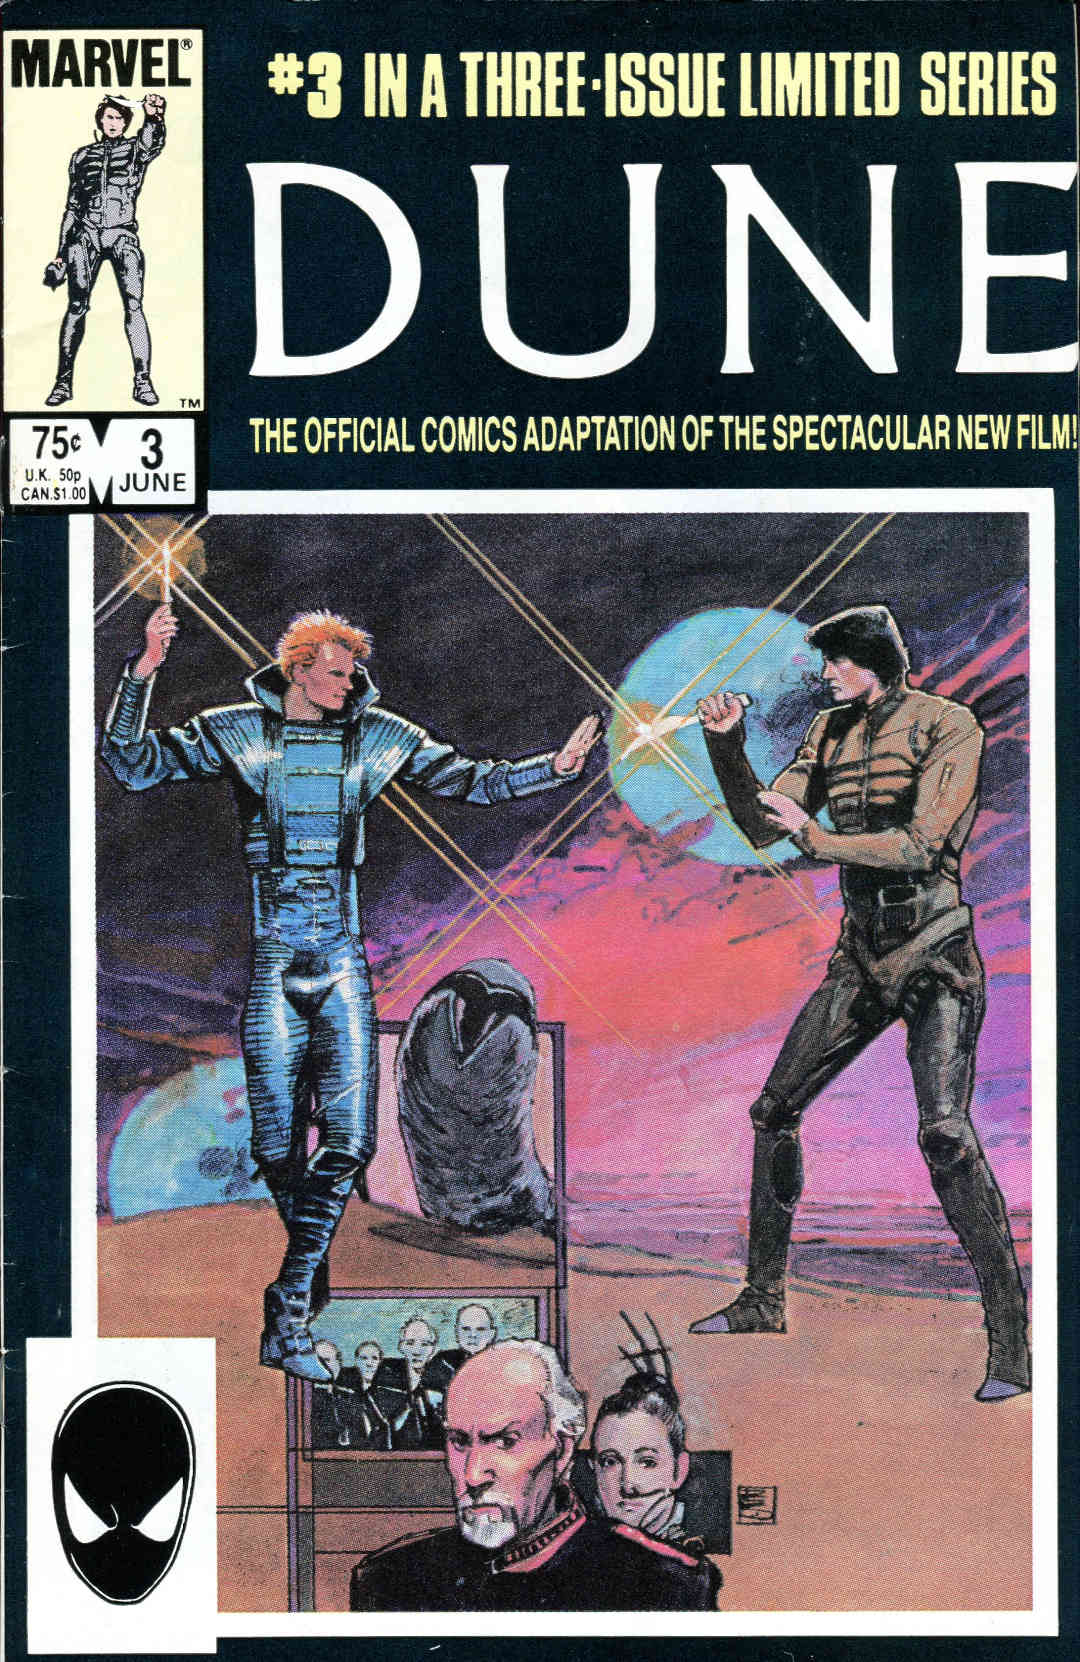 Cover of Marvel Comics 'Dune' #3, illustrated by Bill Sienkiewicz in 1985.